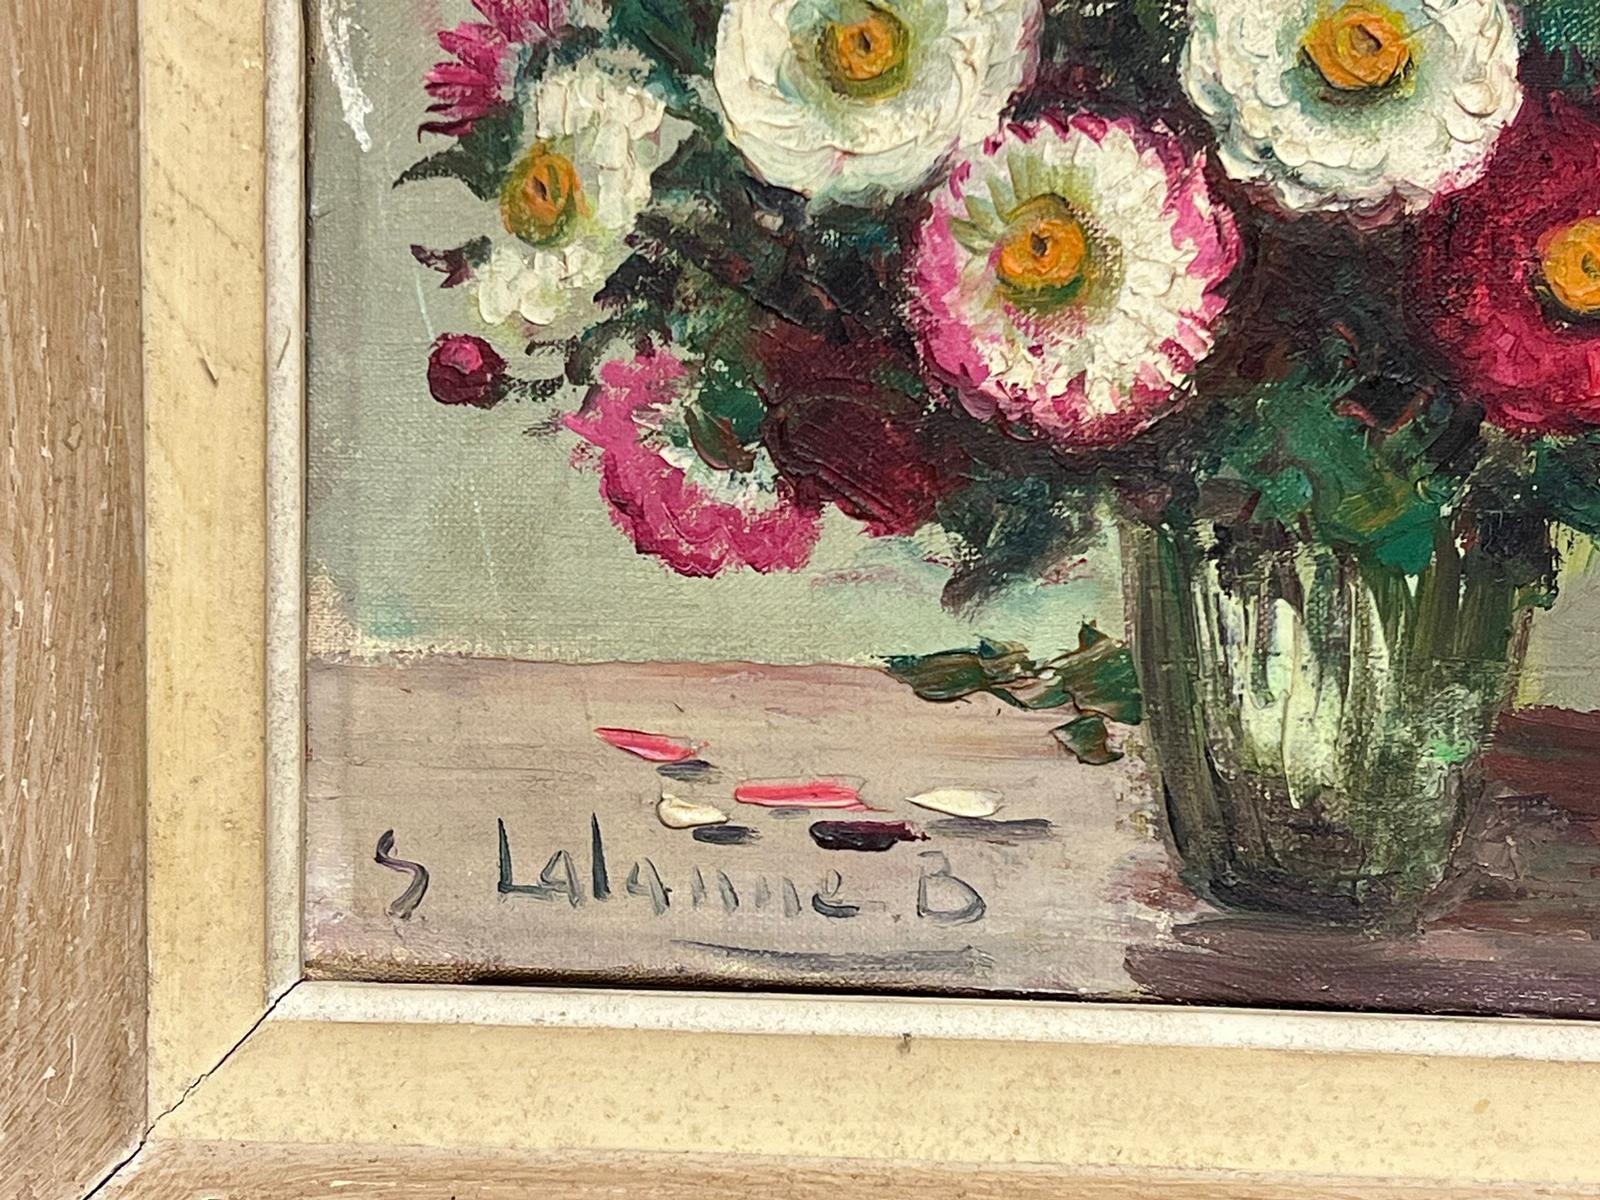 Vintage French Mid 20th Century Still Life Oil Painting Flowers in Vase Original For Sale 1